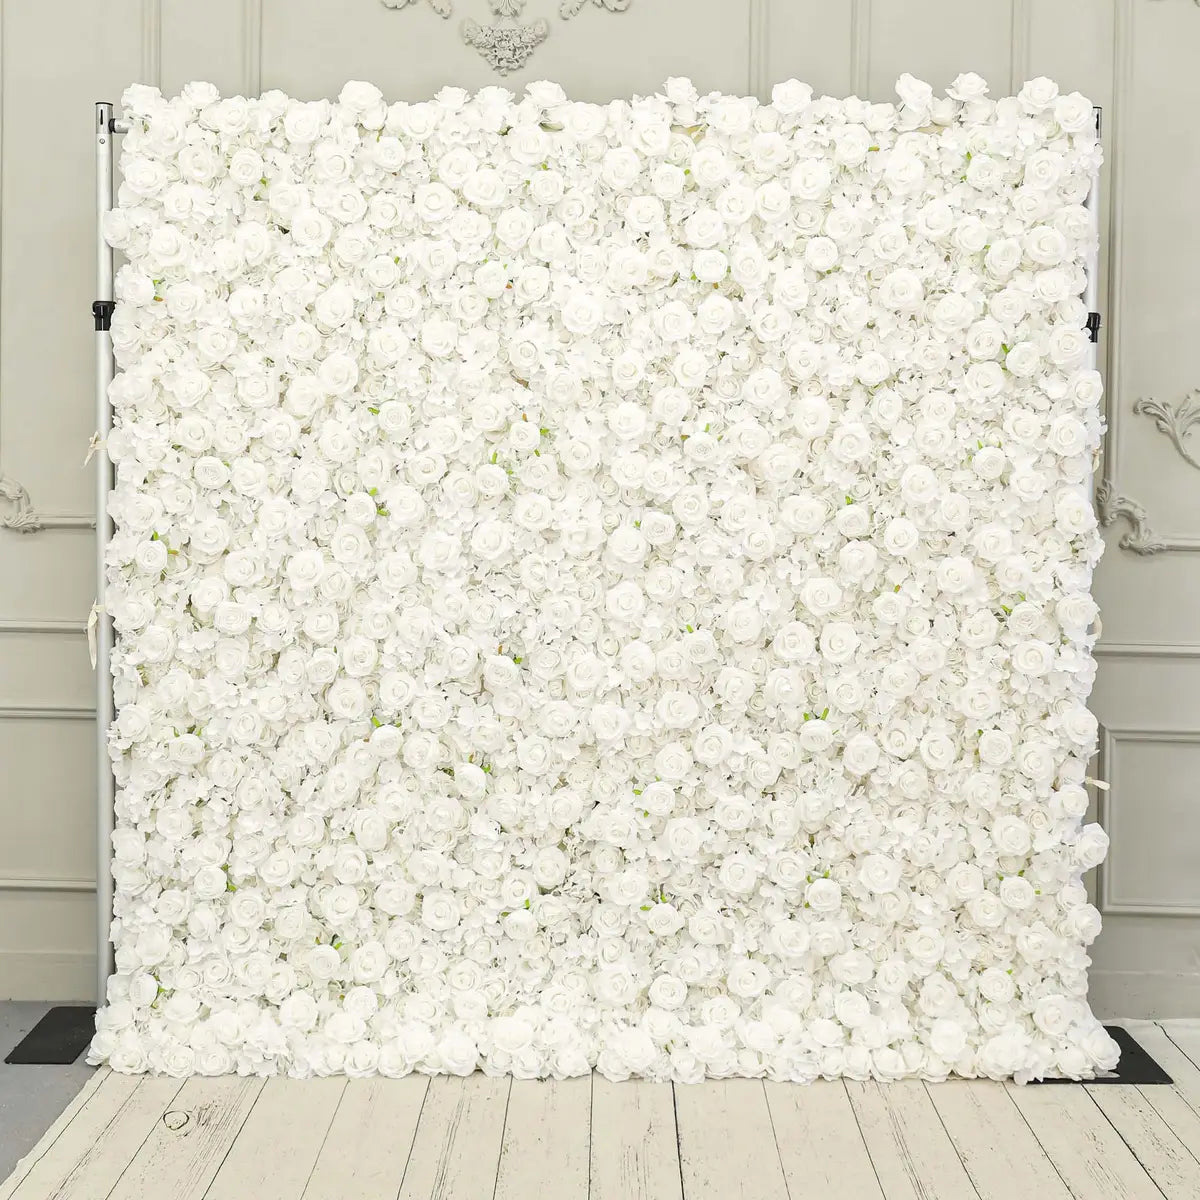 Crafted for realism, the 3D white rose flower wall boasts a fabric backing and fade-resistant colors.